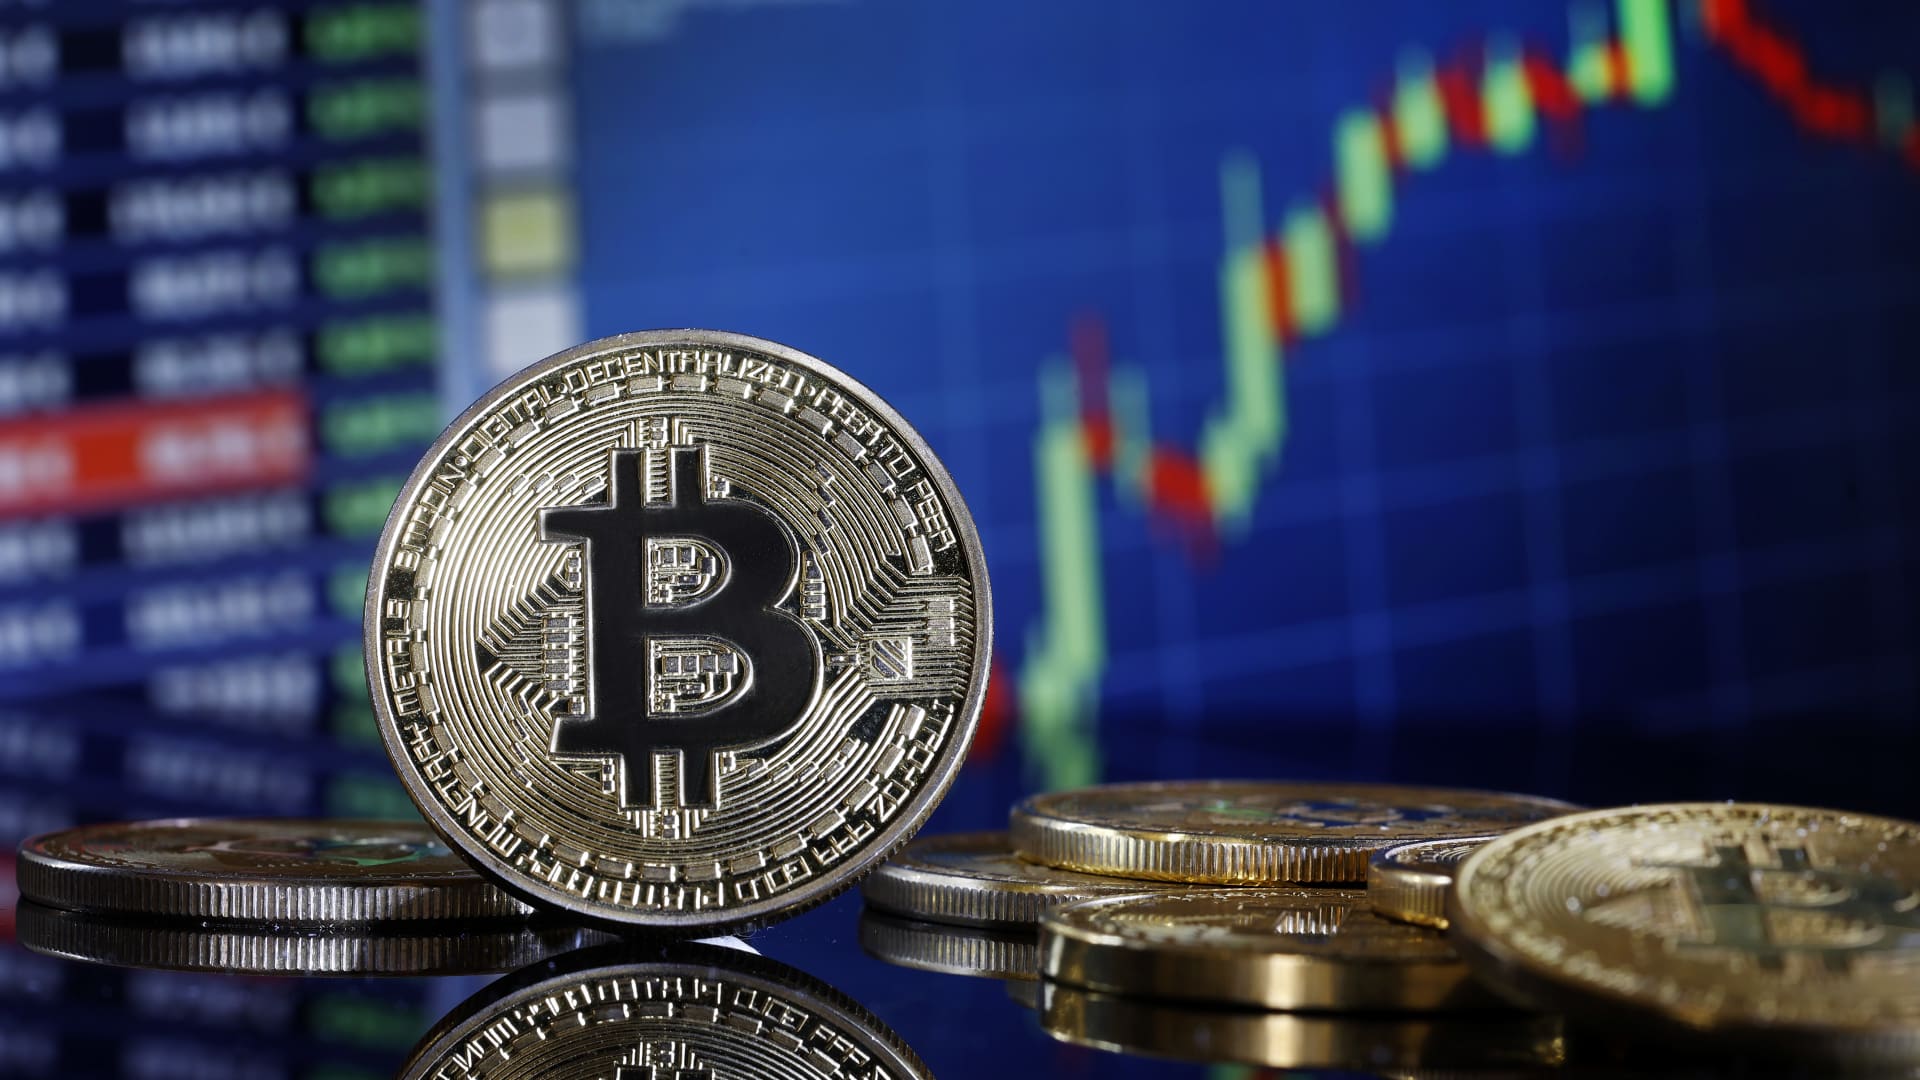 Bitcoin breaks above $47,000 for the first time since March 2022